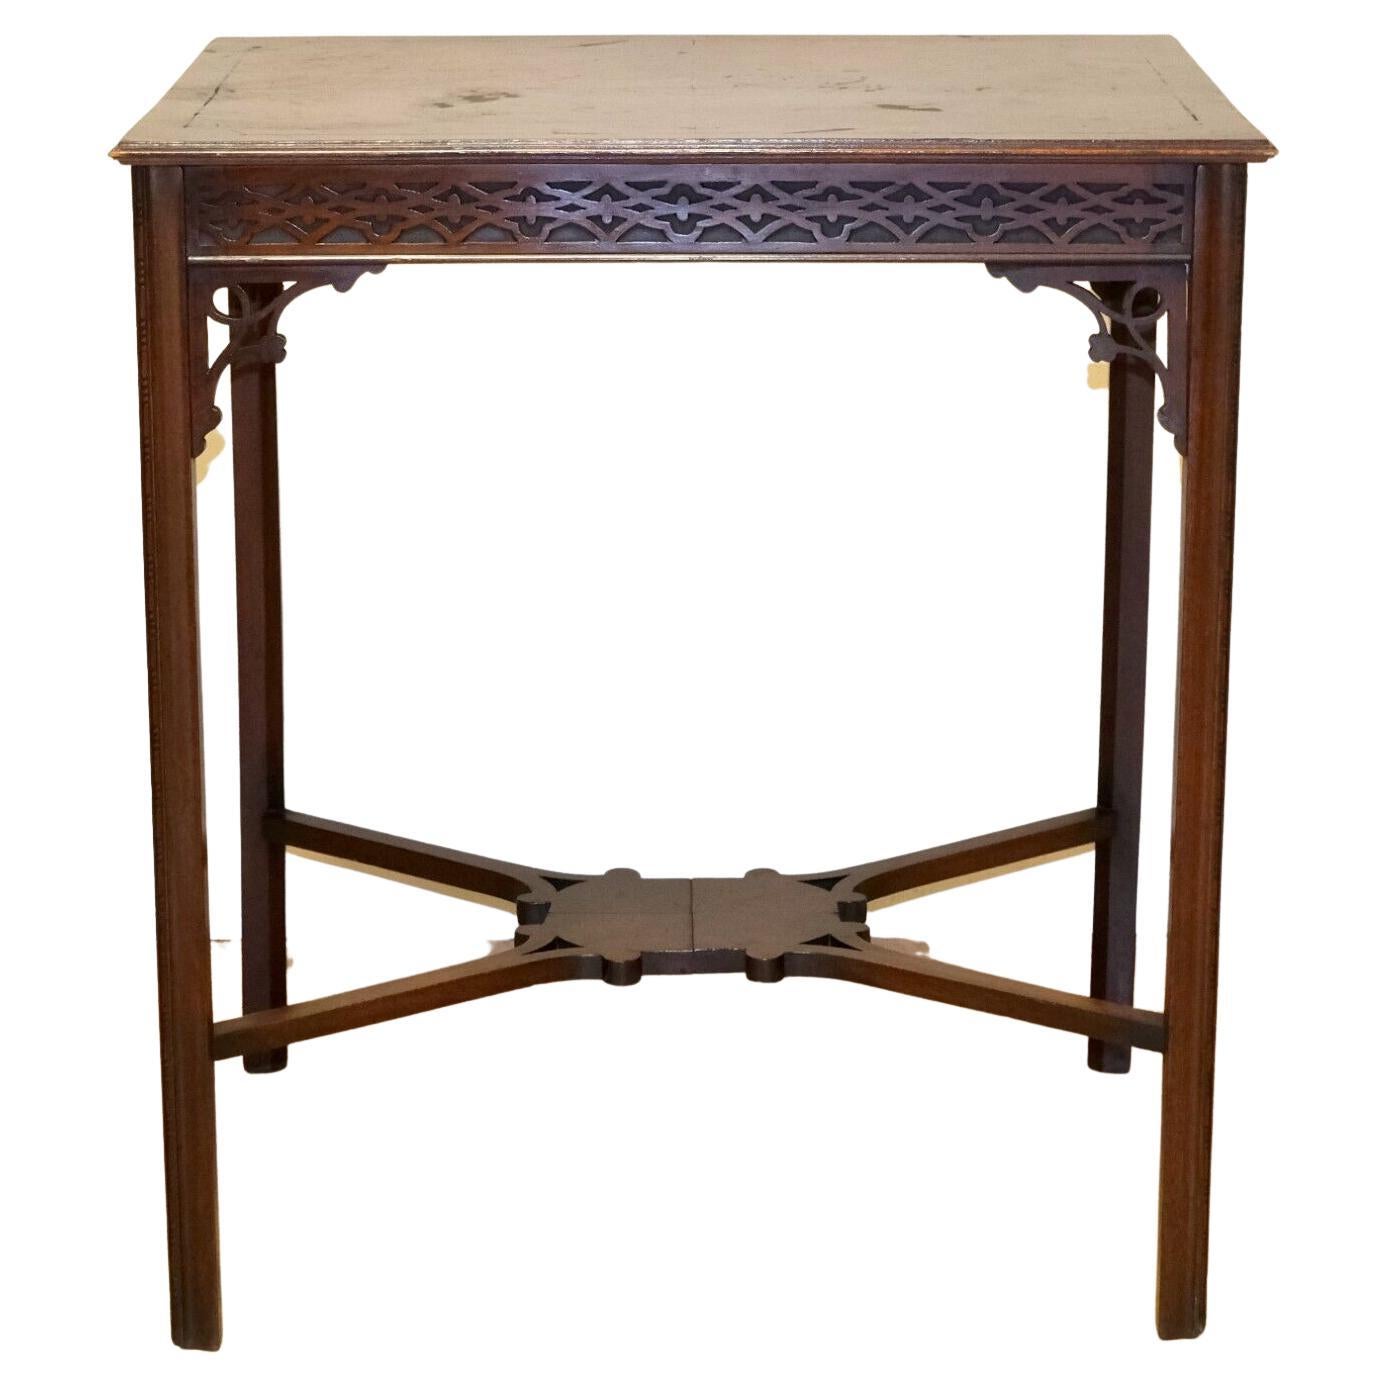 We are delighted to offer for sale this decorative Edwardian mahogany brown side table.

This beautiful piece shows carvings on each leg featuring a blind fretwork frieze which is identical front and back, so it can be used as a free standing table